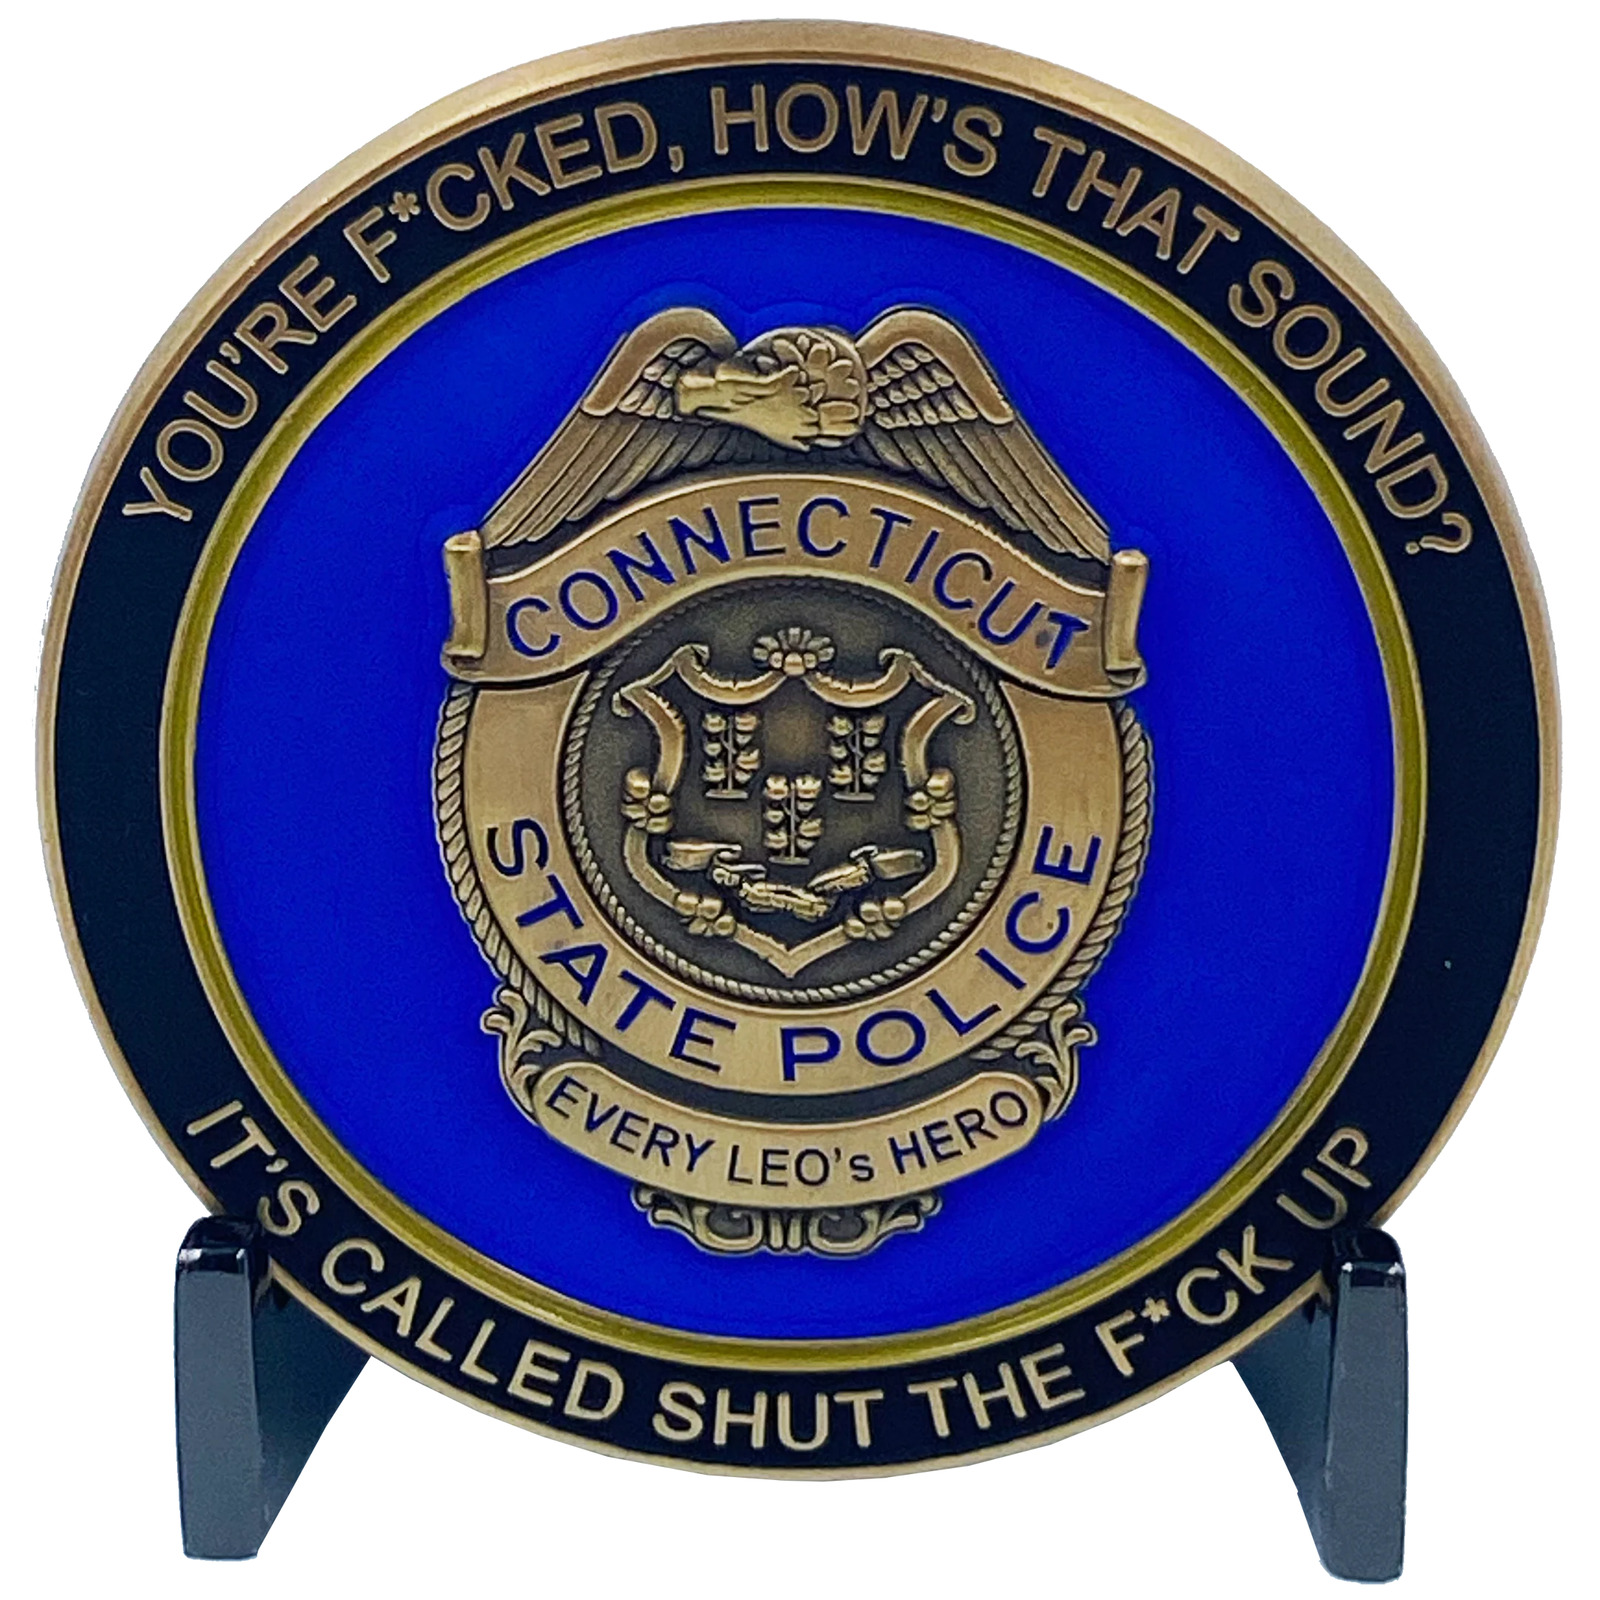 CL6-15 CSP Version 1 Challenge Coin inspired by Connecticut State Police CT Troo